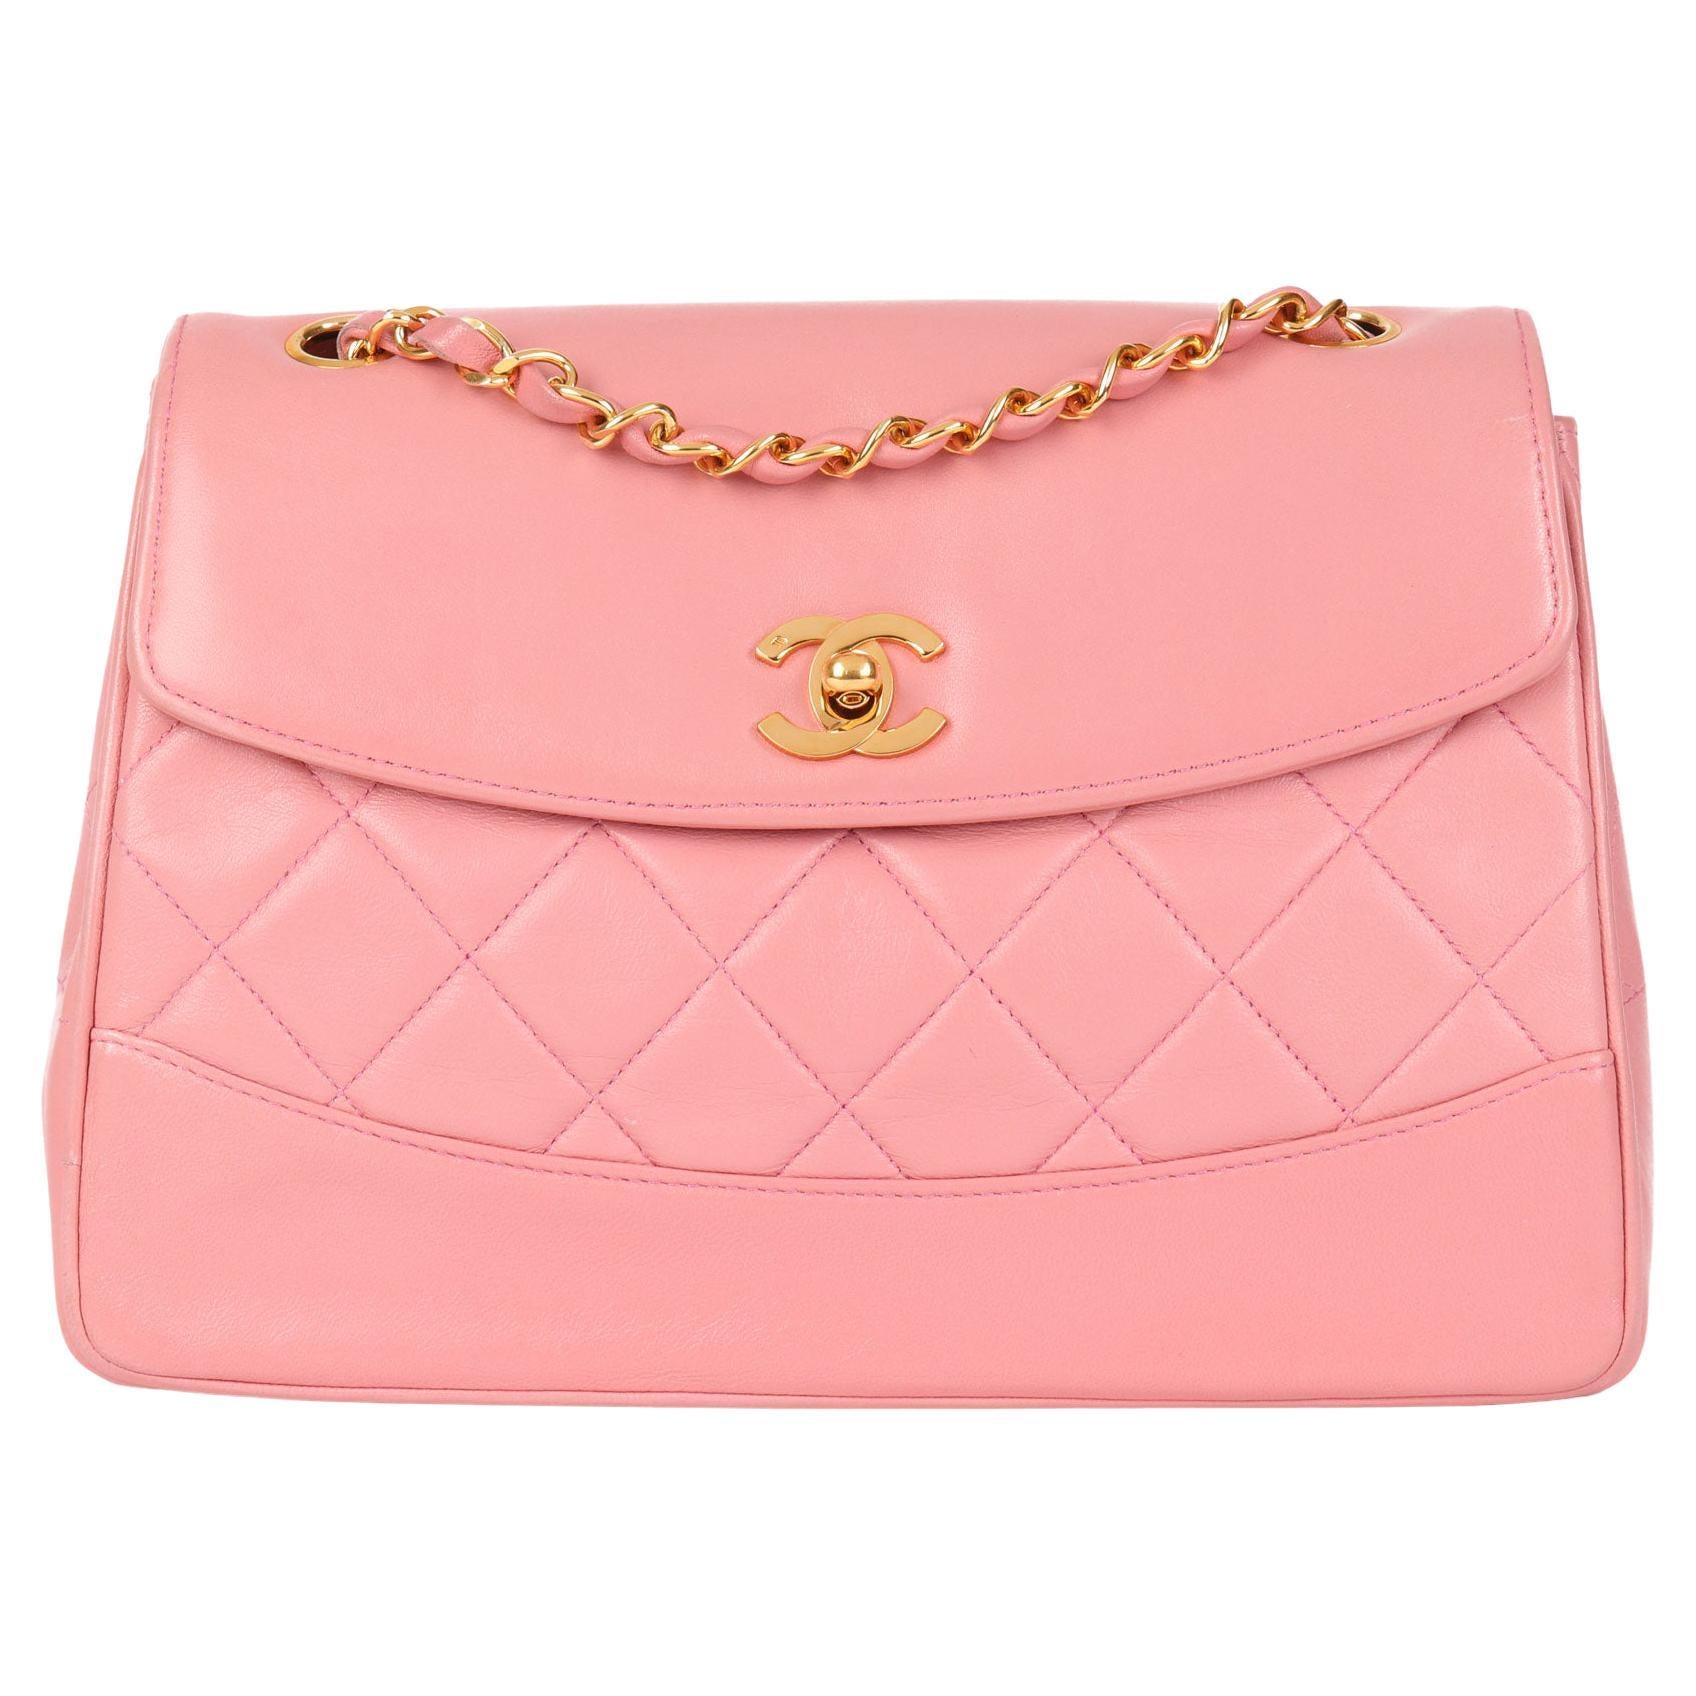 Chanel Pink Quilted Lambskin Vintage Medium Classic Single Flap